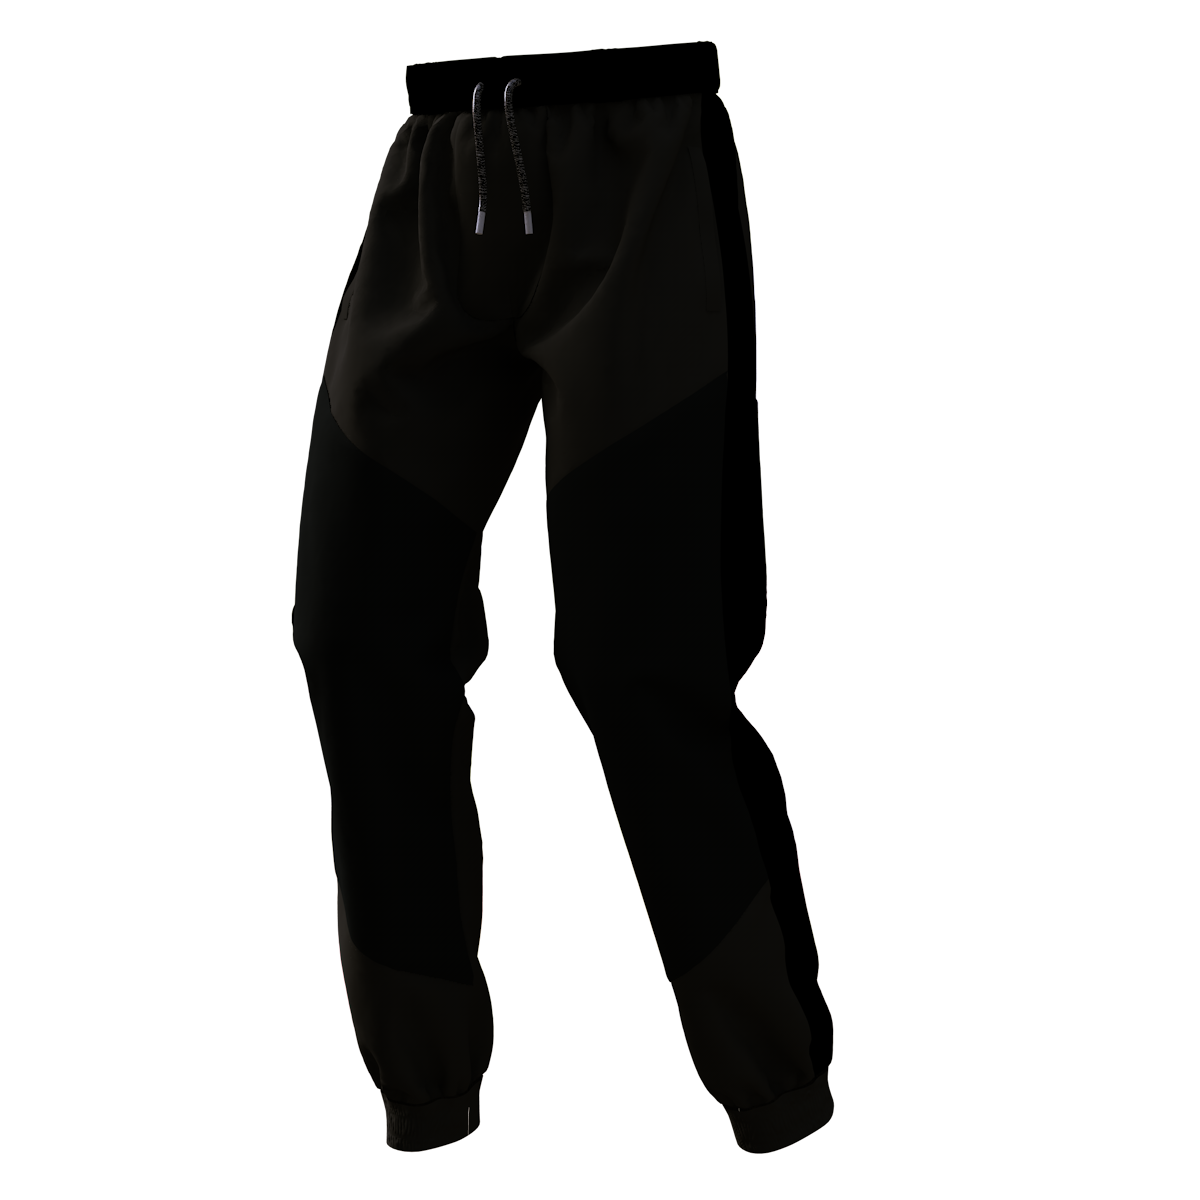 Blackout Legacy Joggers - Ruthless Paintball Products